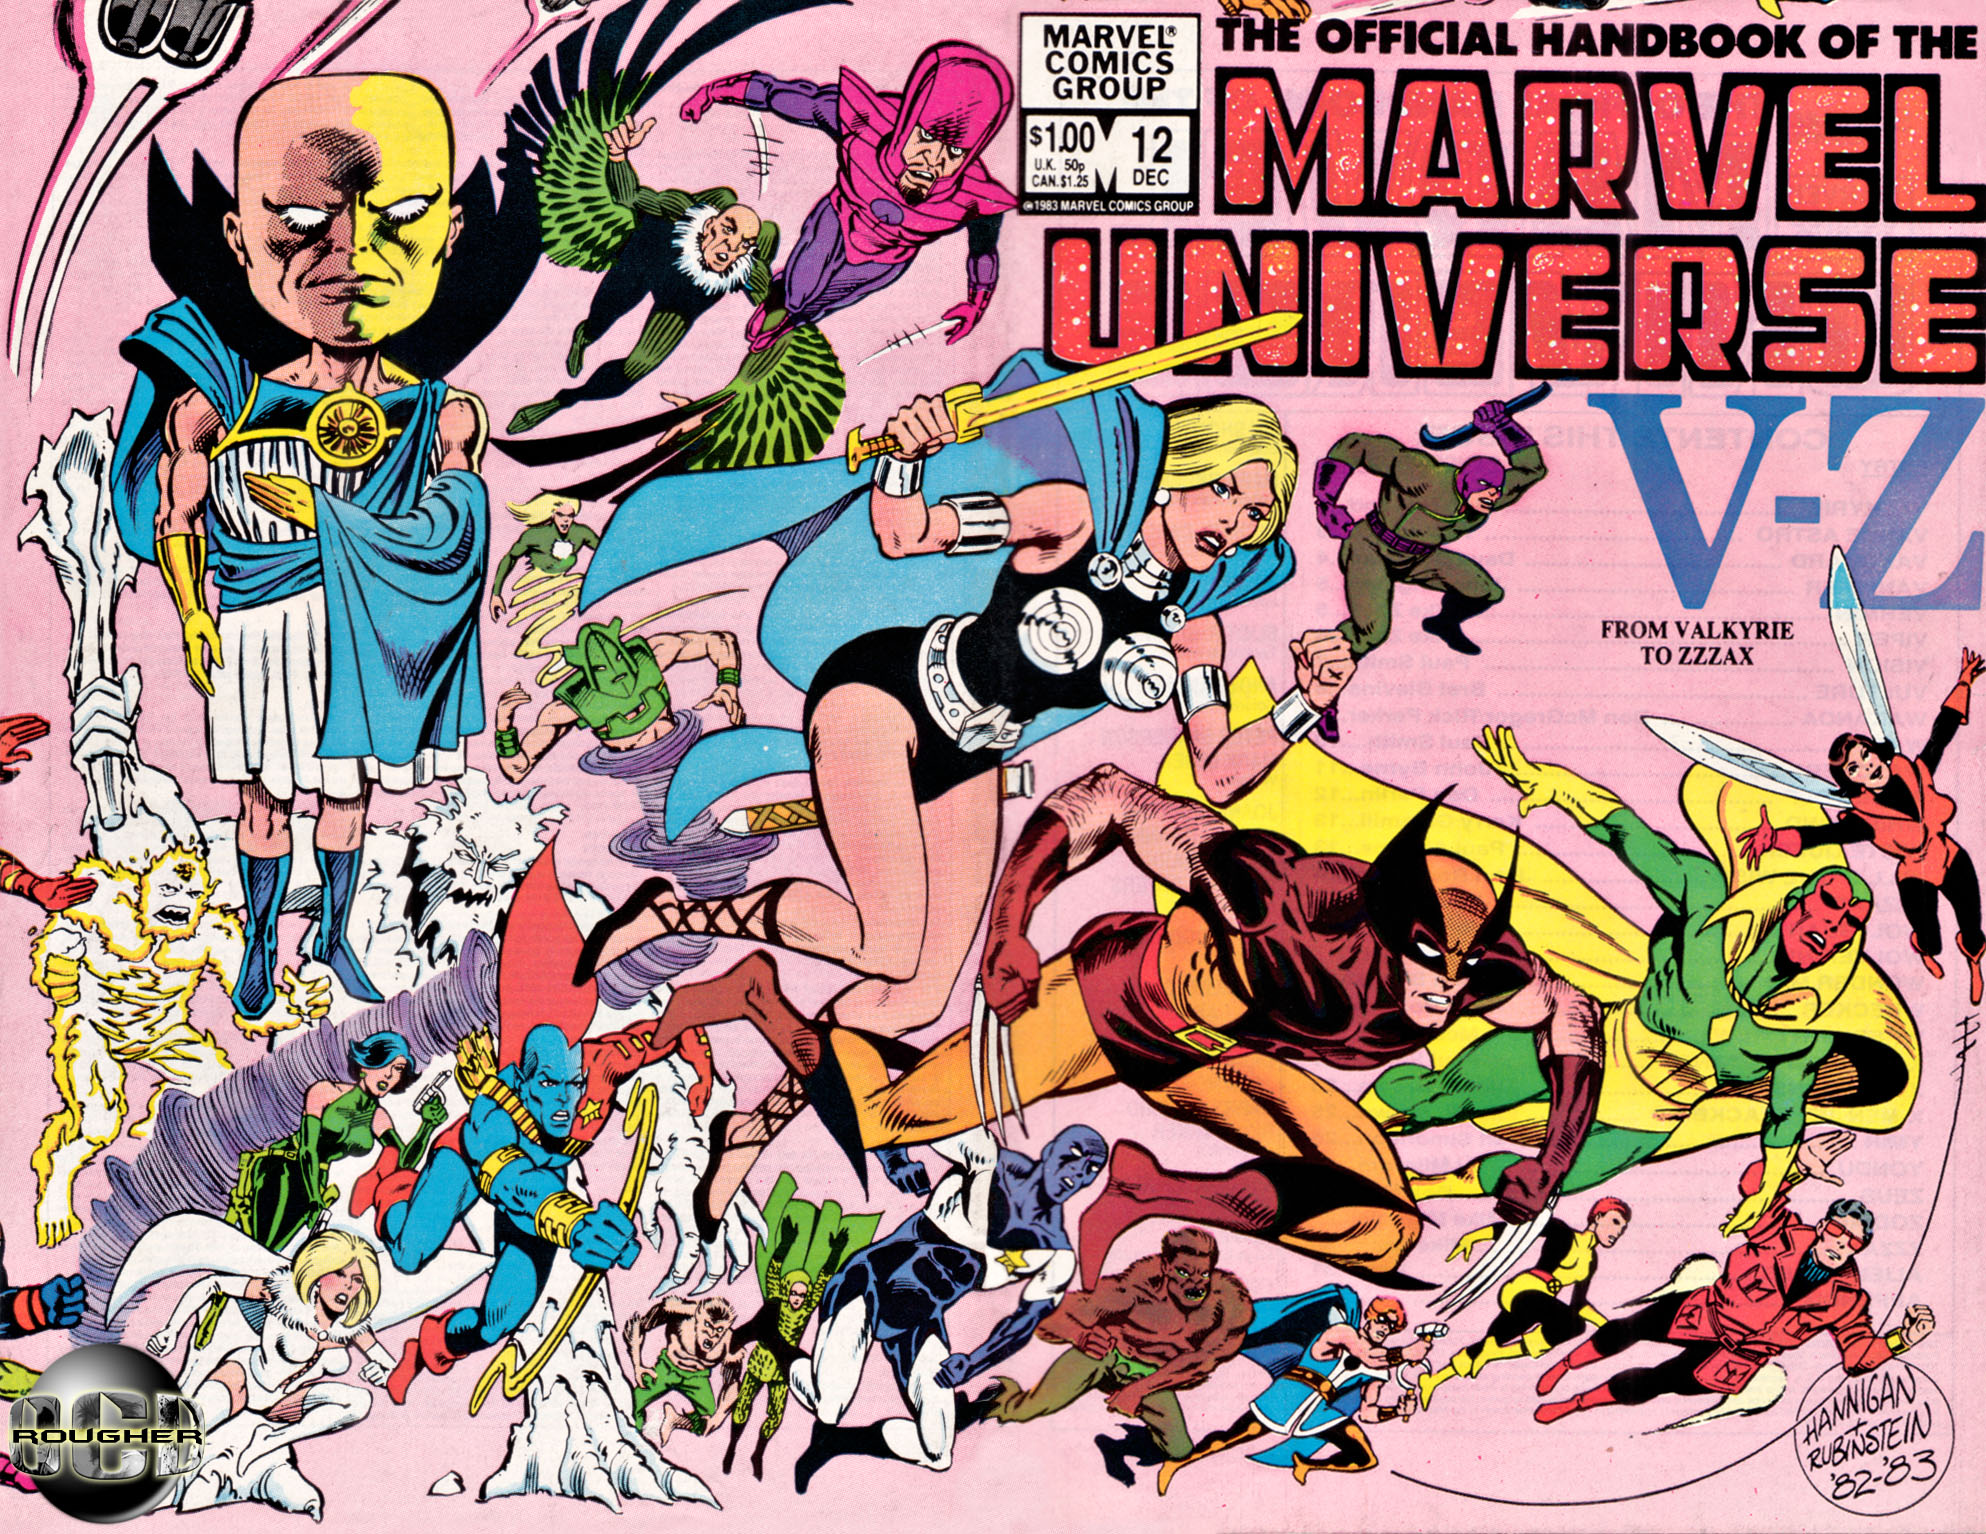 Read online The Official Handbook of the Marvel Universe comic -  Issue #12 - 1